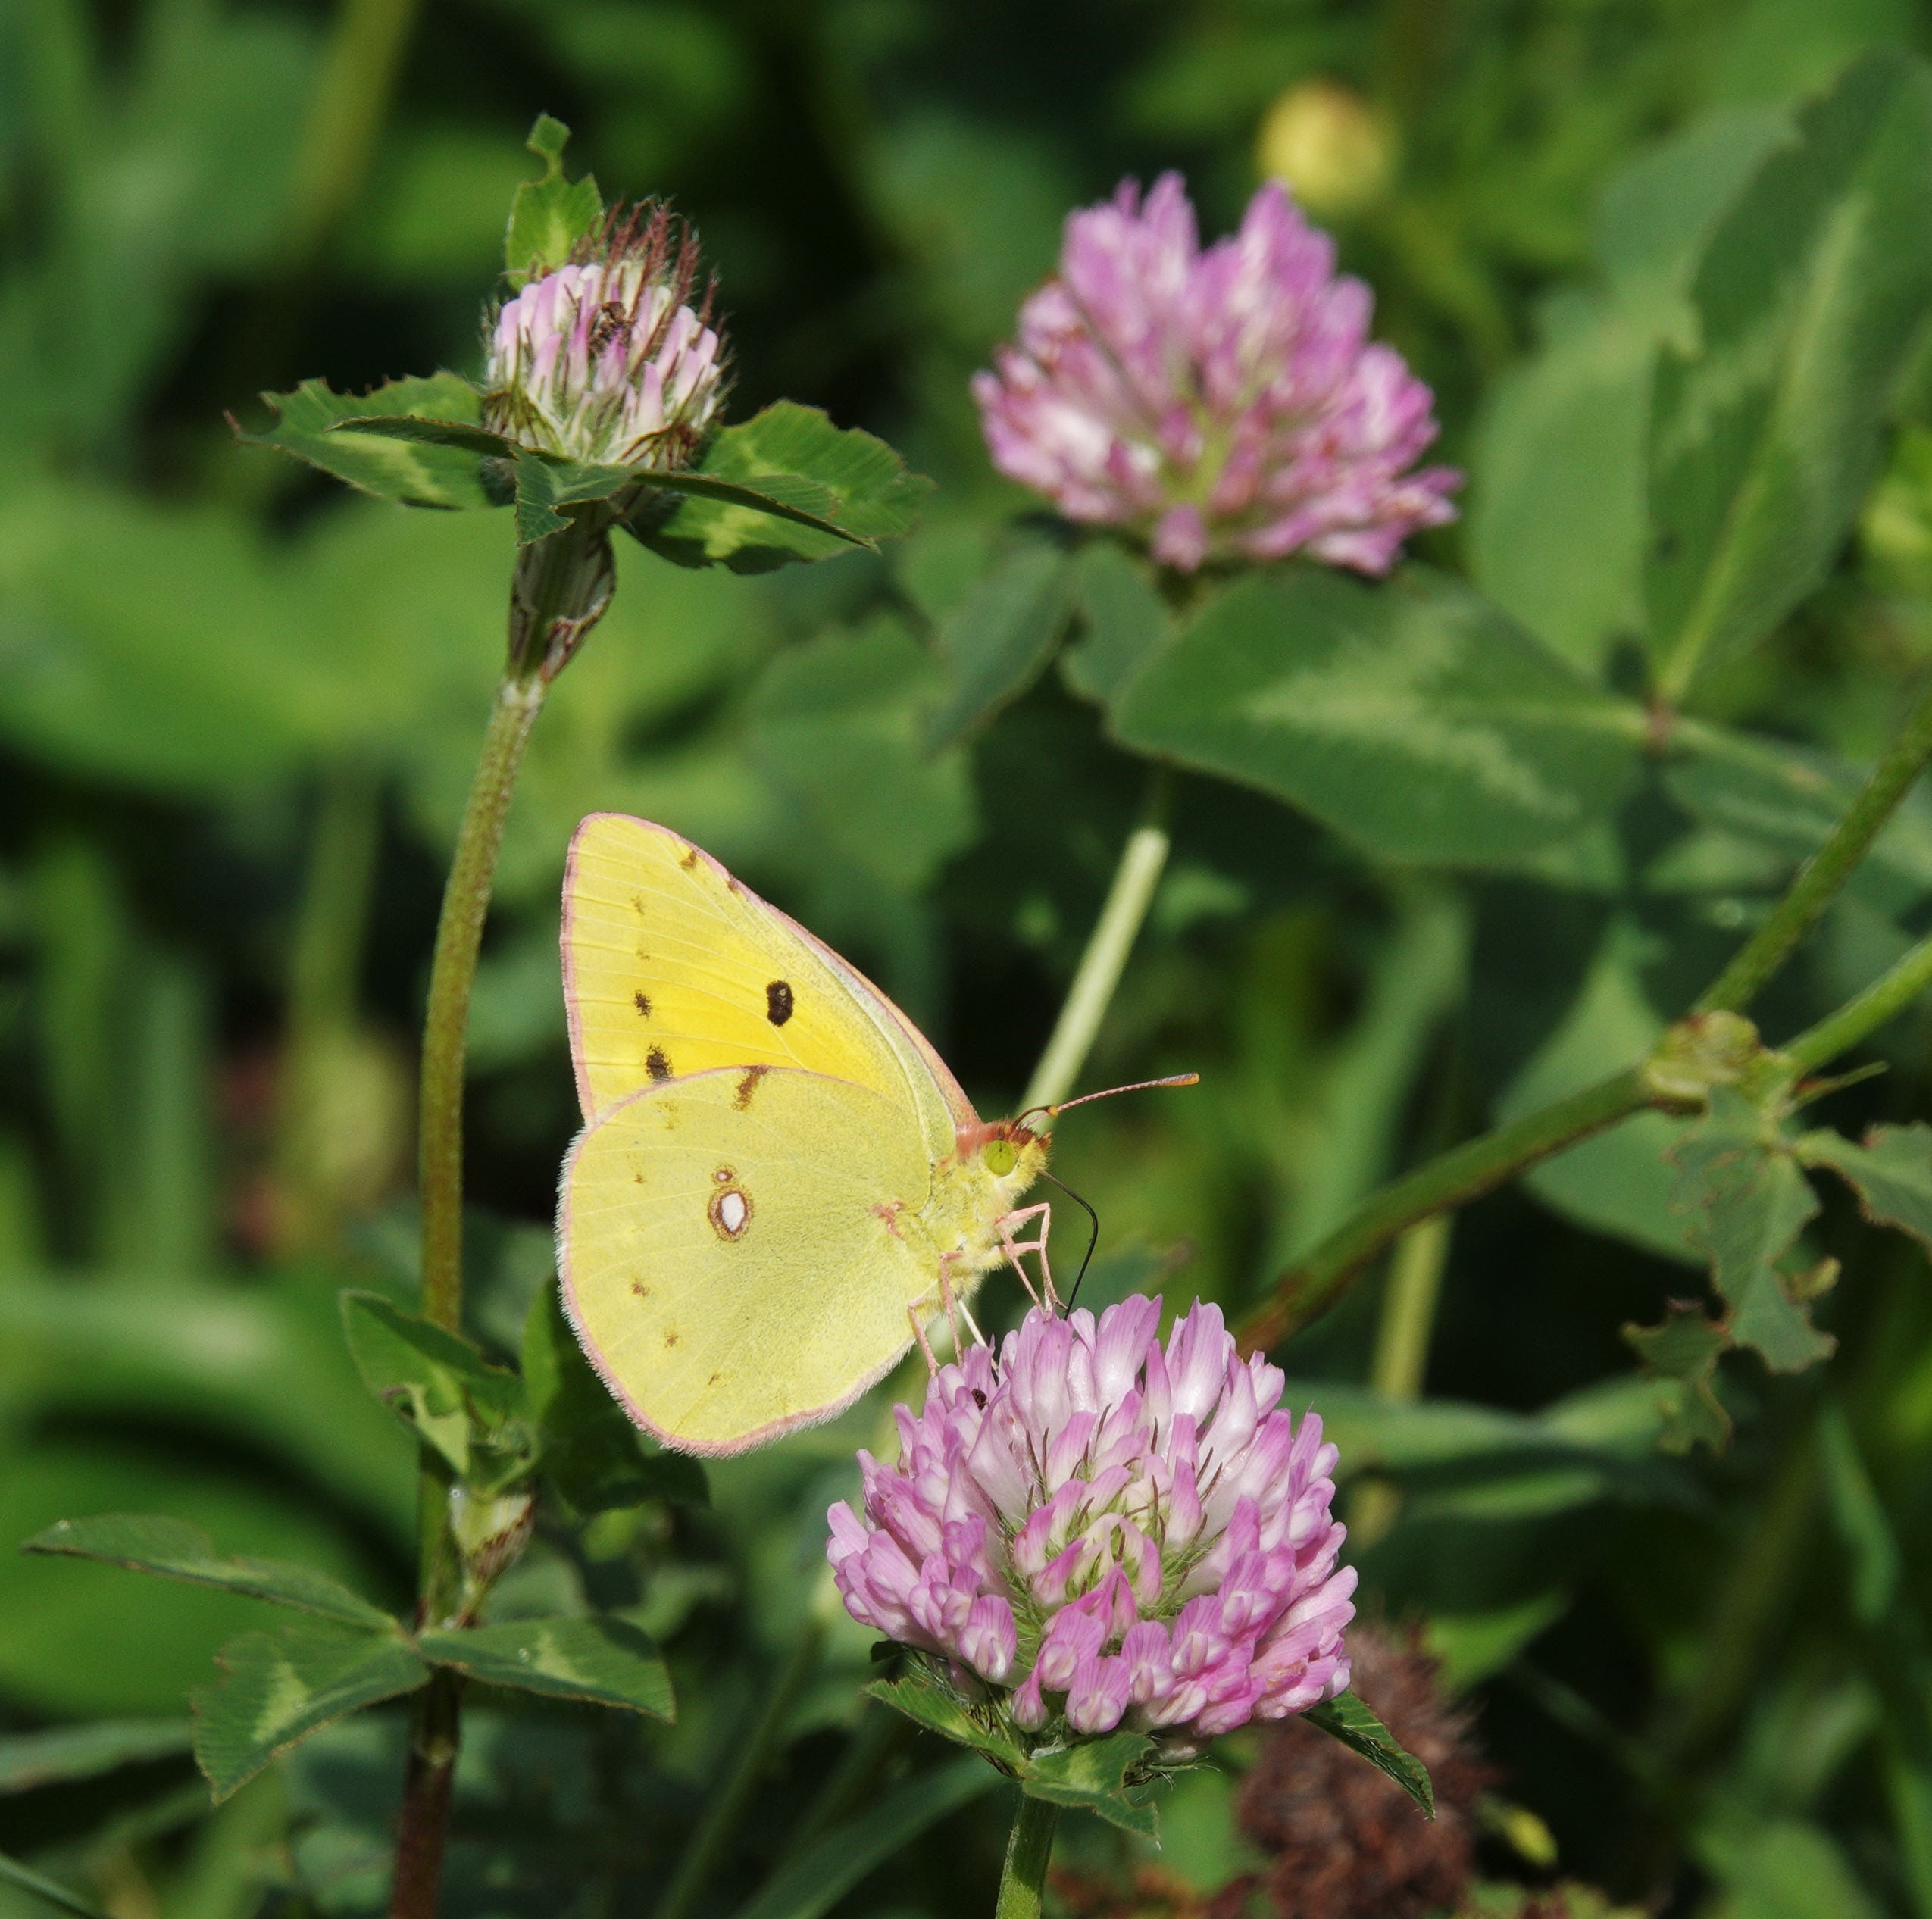 The usual view of a Clouded Yellow settled, with wings closed.